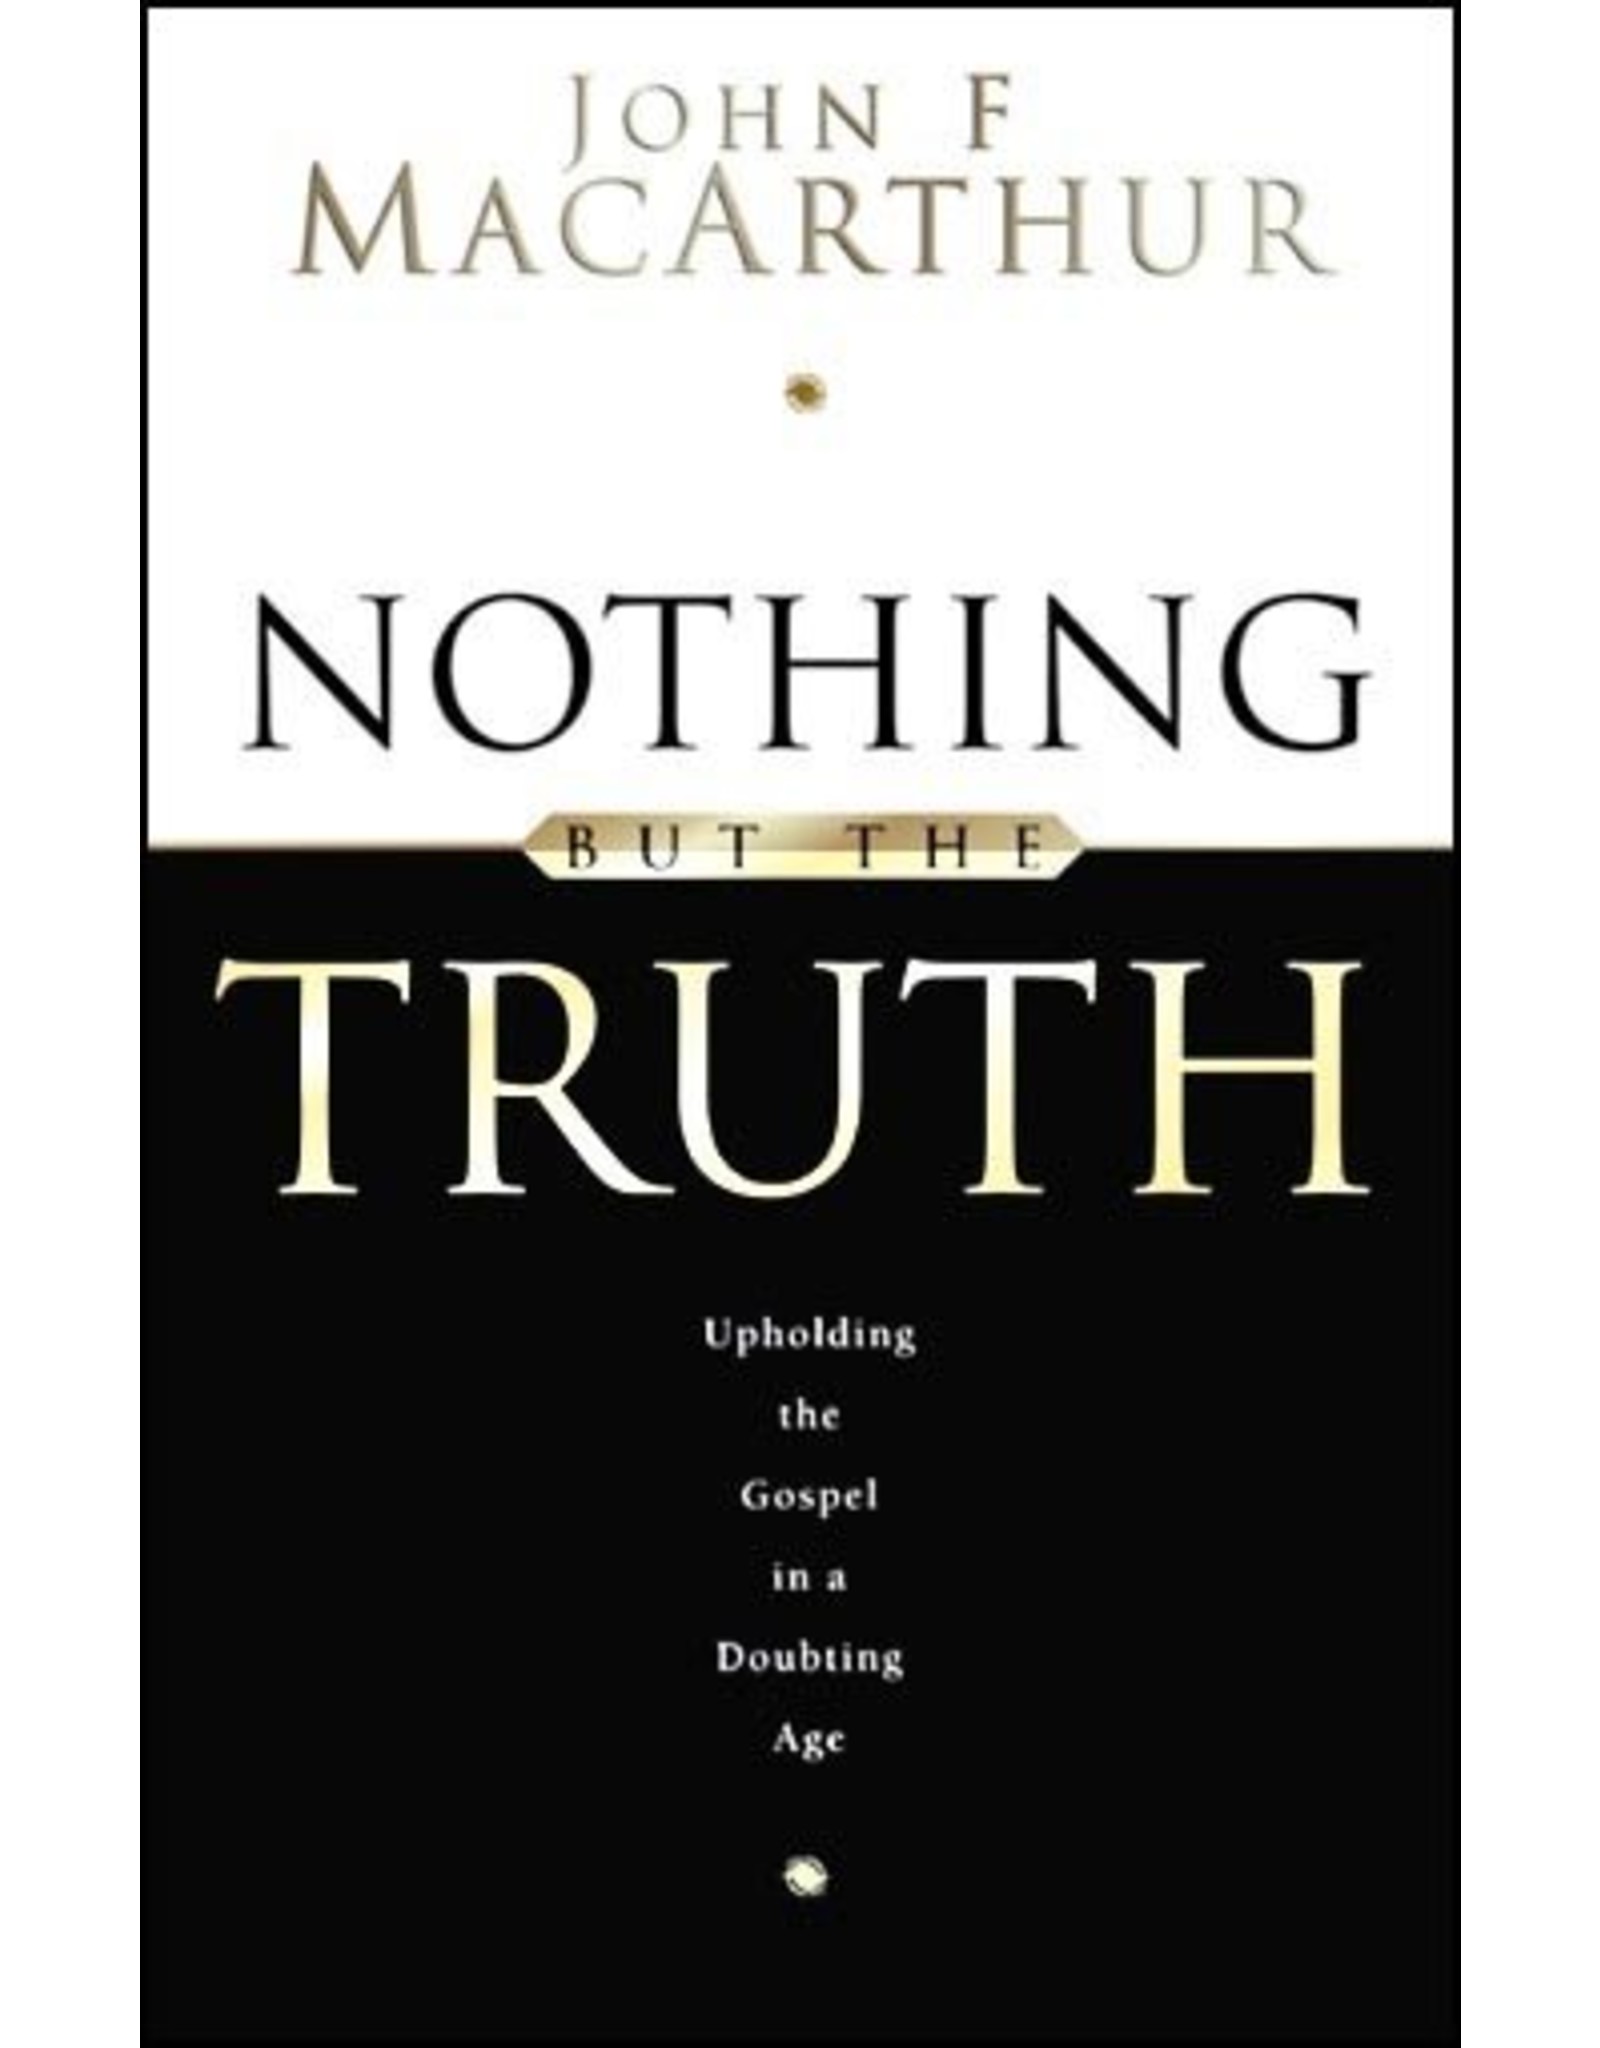 Nothing But The Truth: Upholding the Gospel in a Doubting Age